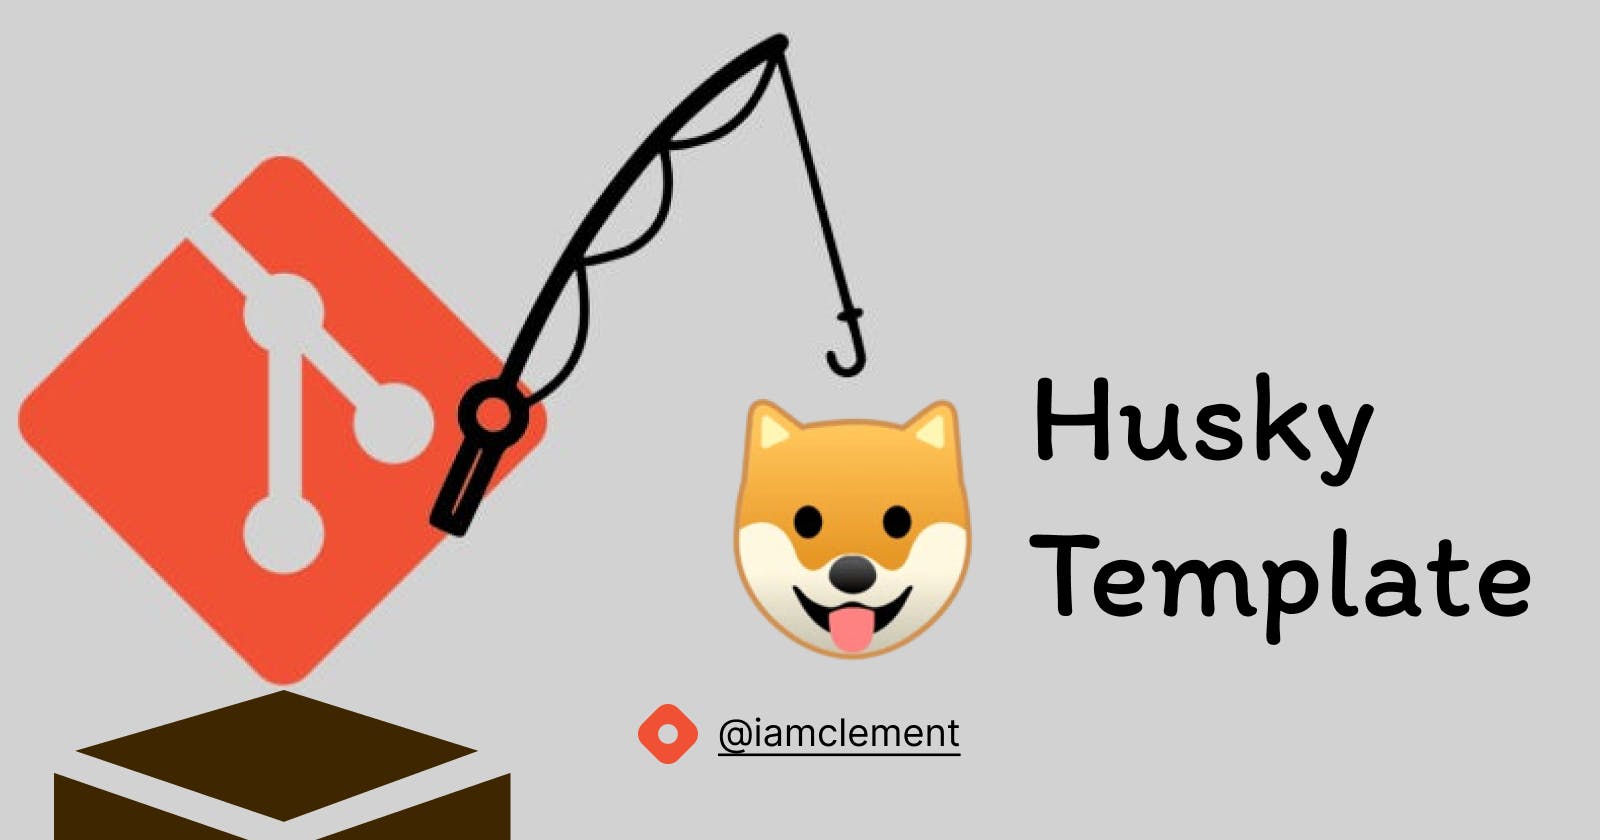 Next.js Template With Husky, Lint-Staged for pre-commit Hooks.